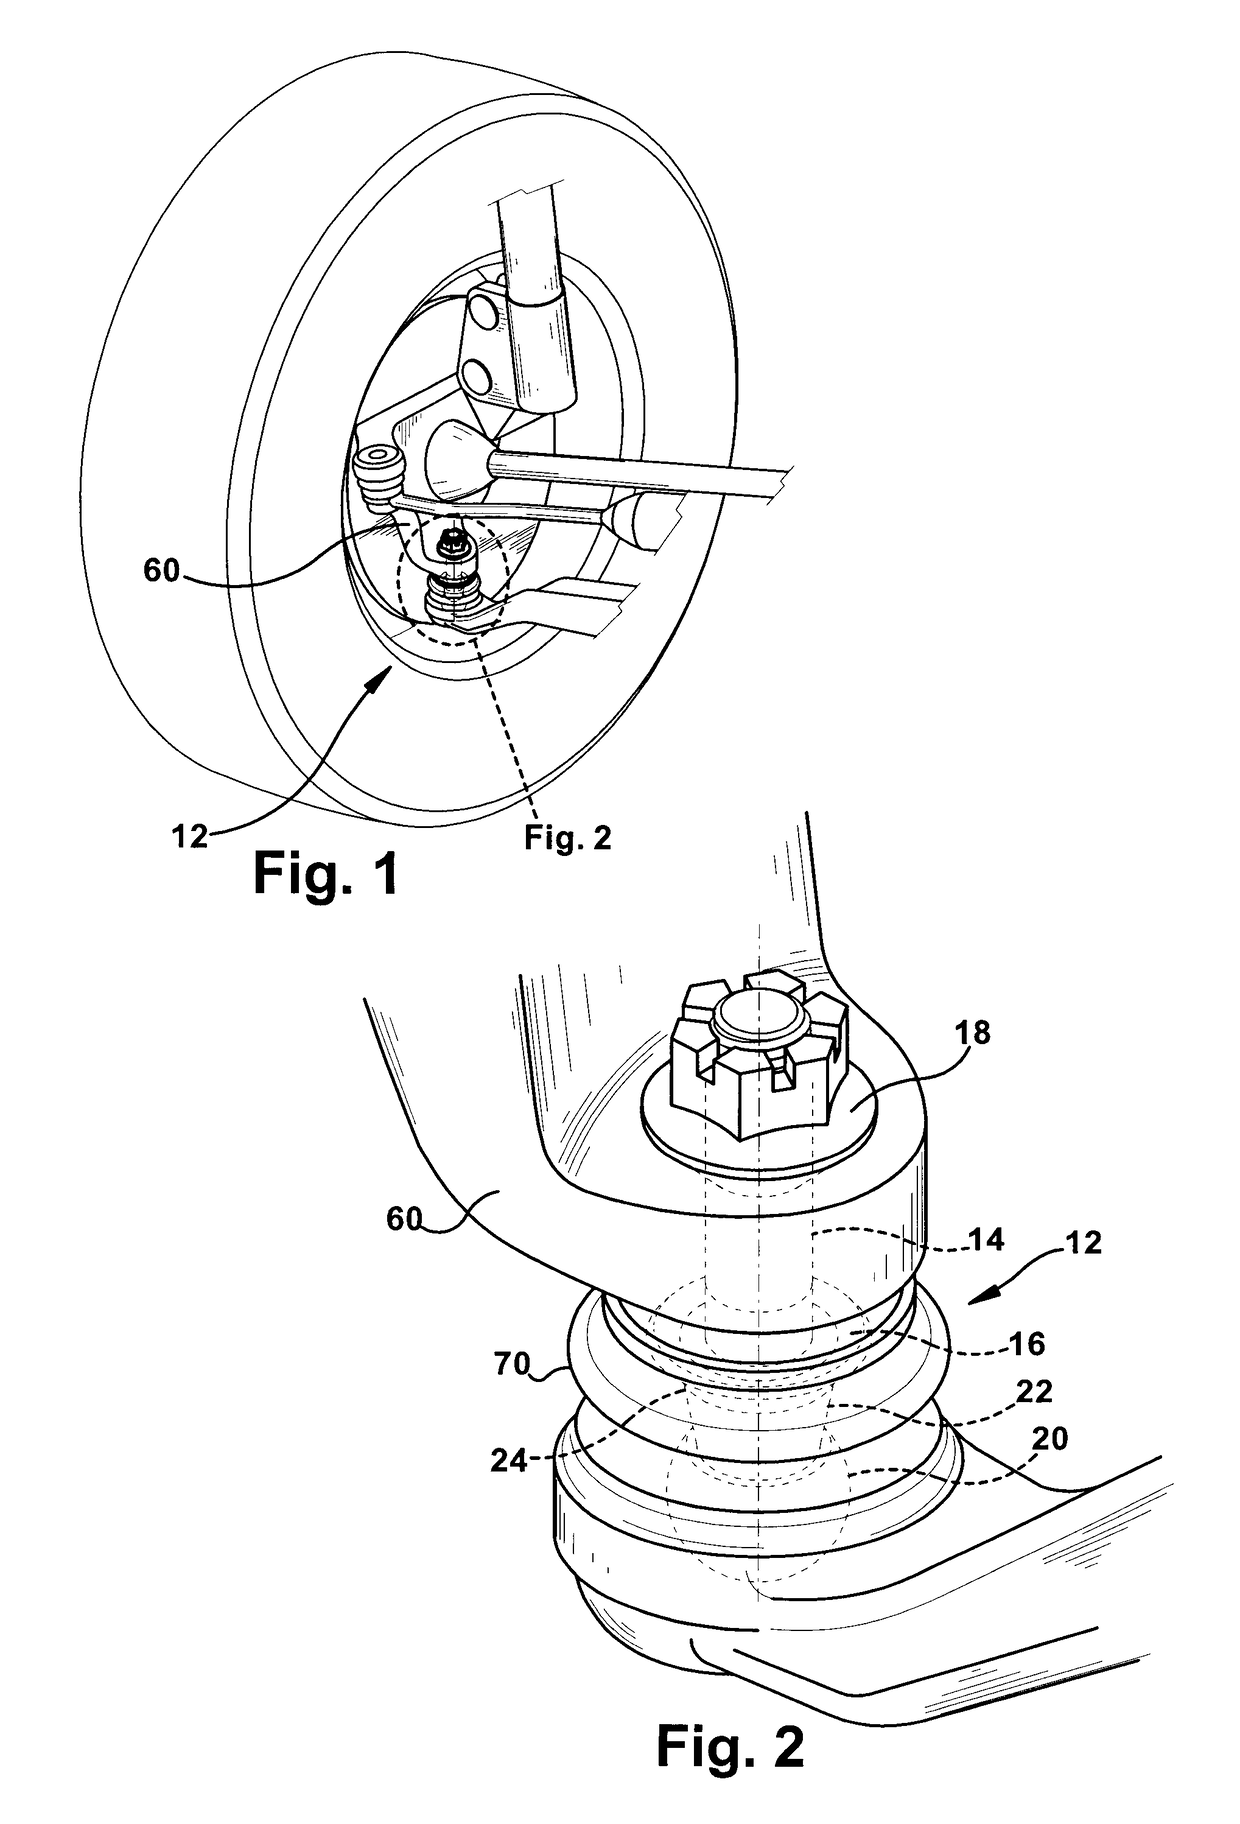 Ball stud system for use within a ball joint